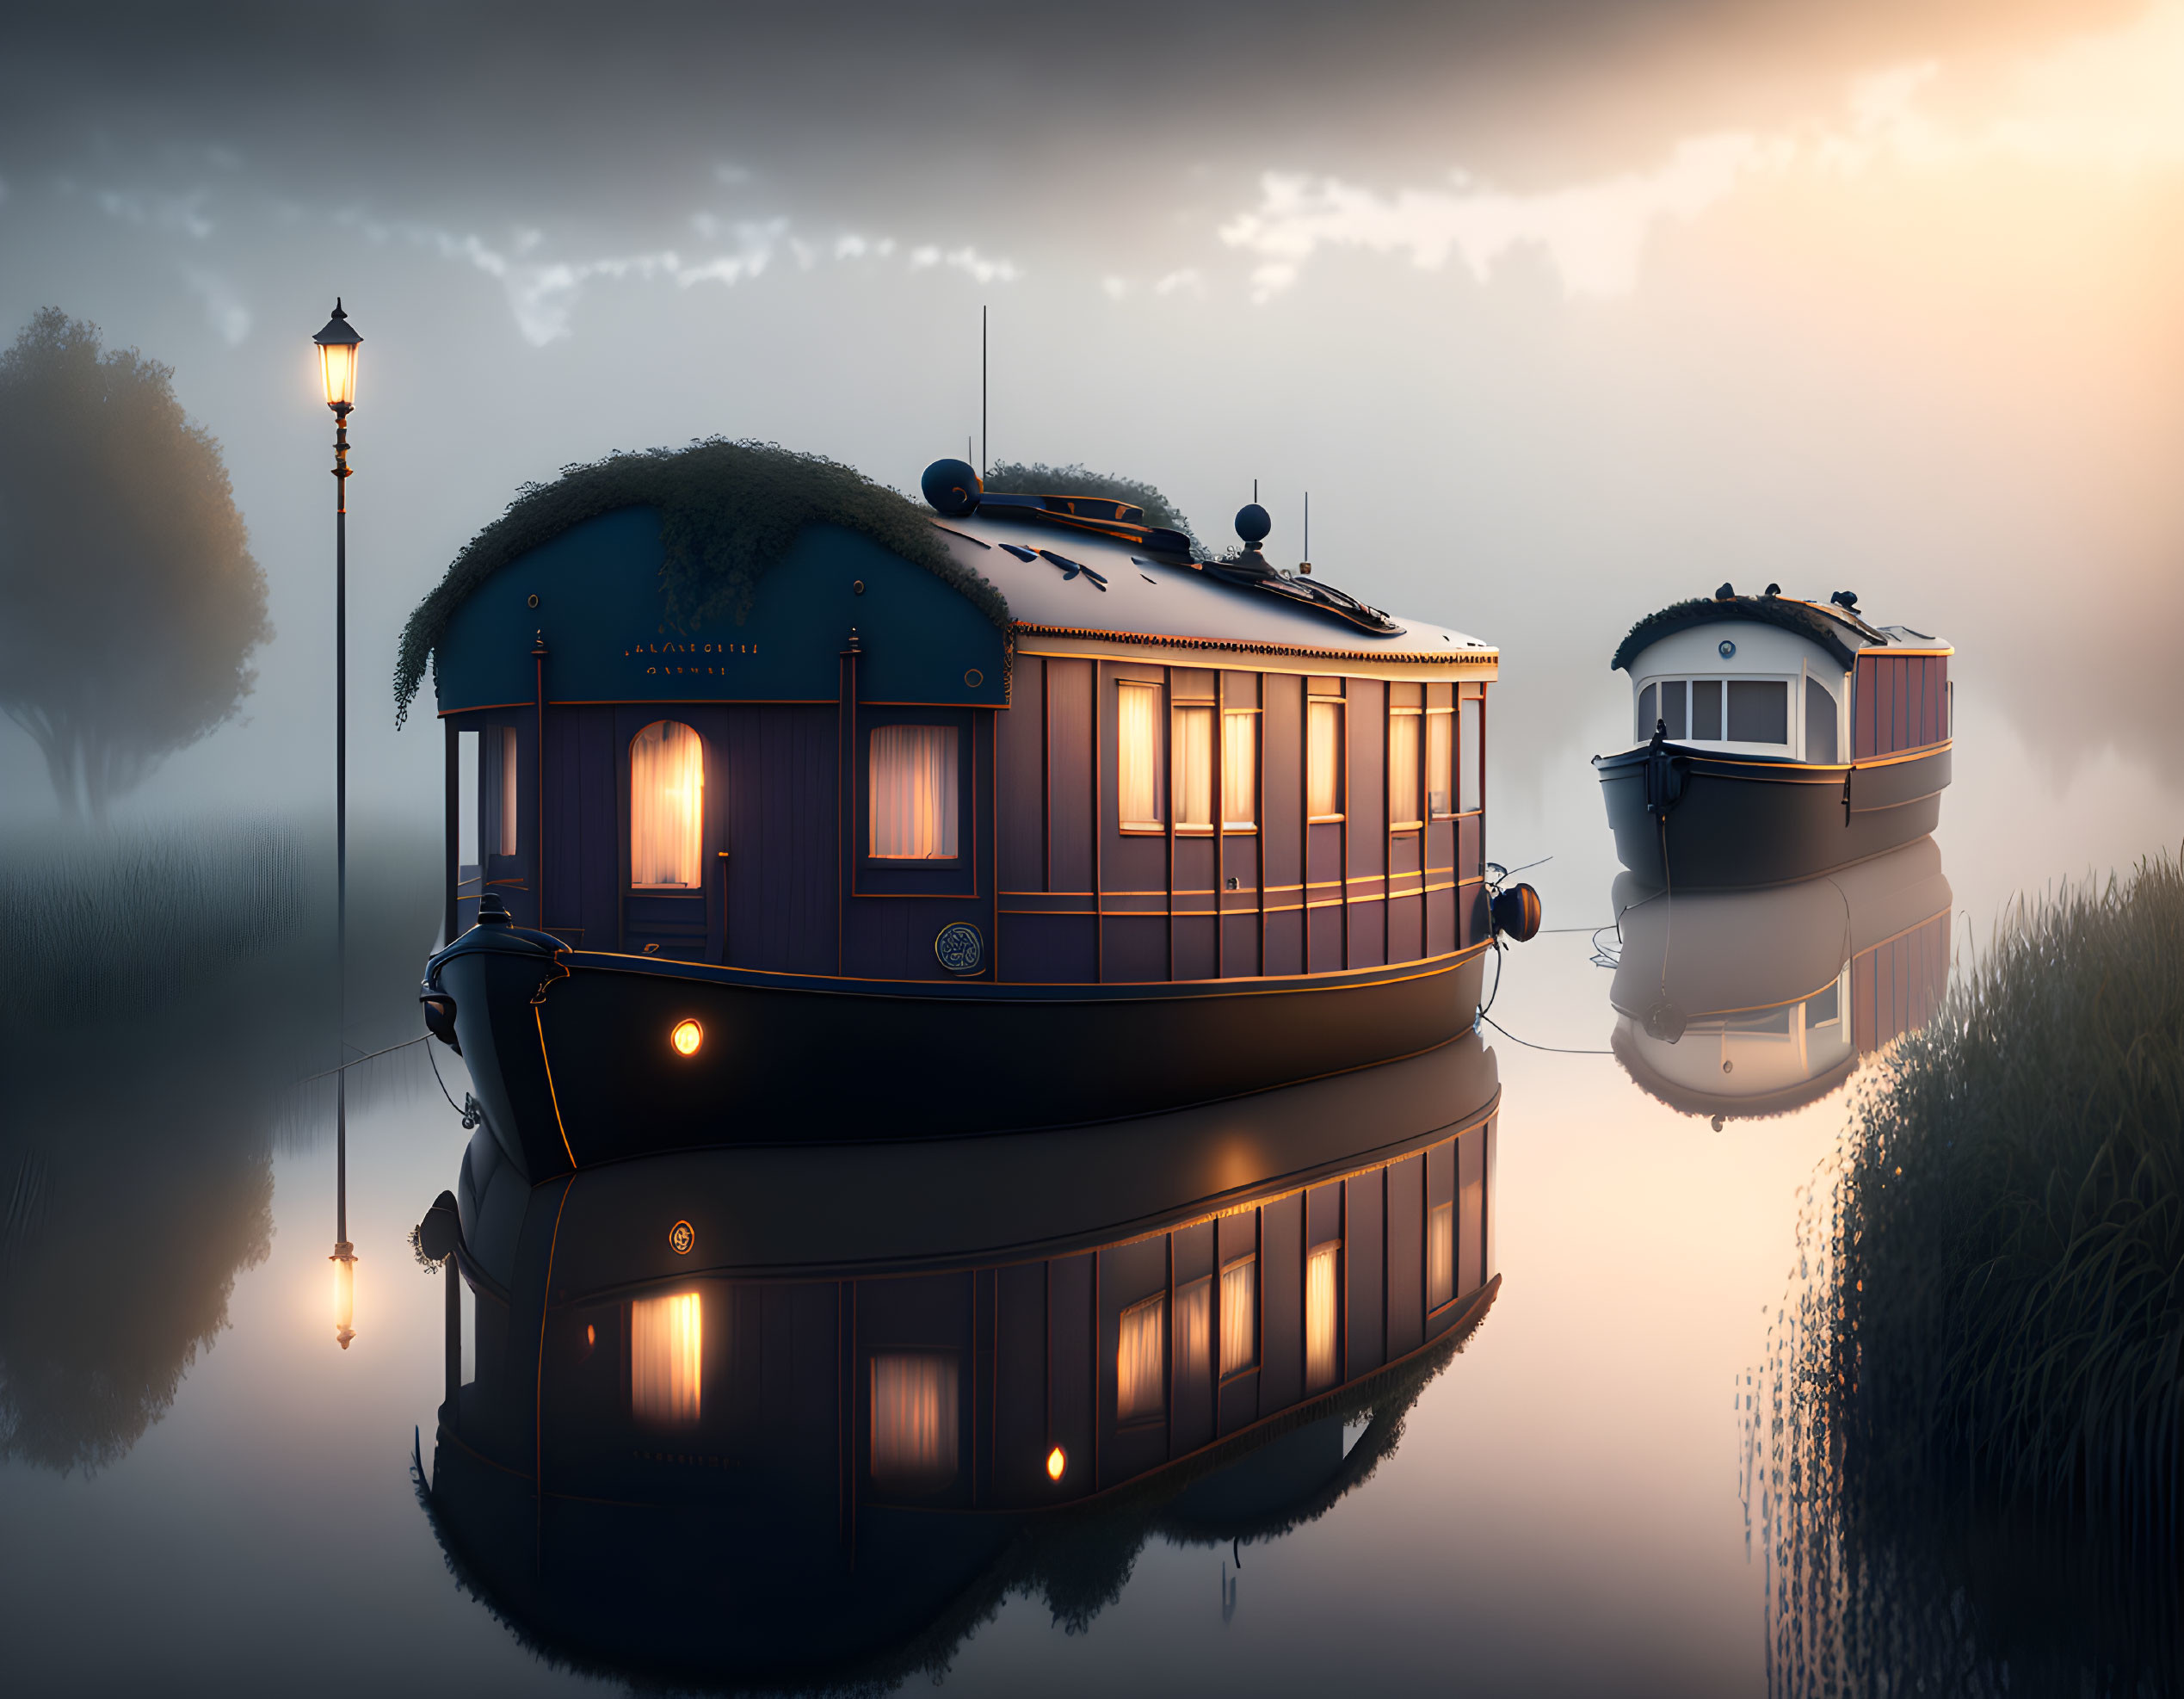 Moody landscape with a houseboat